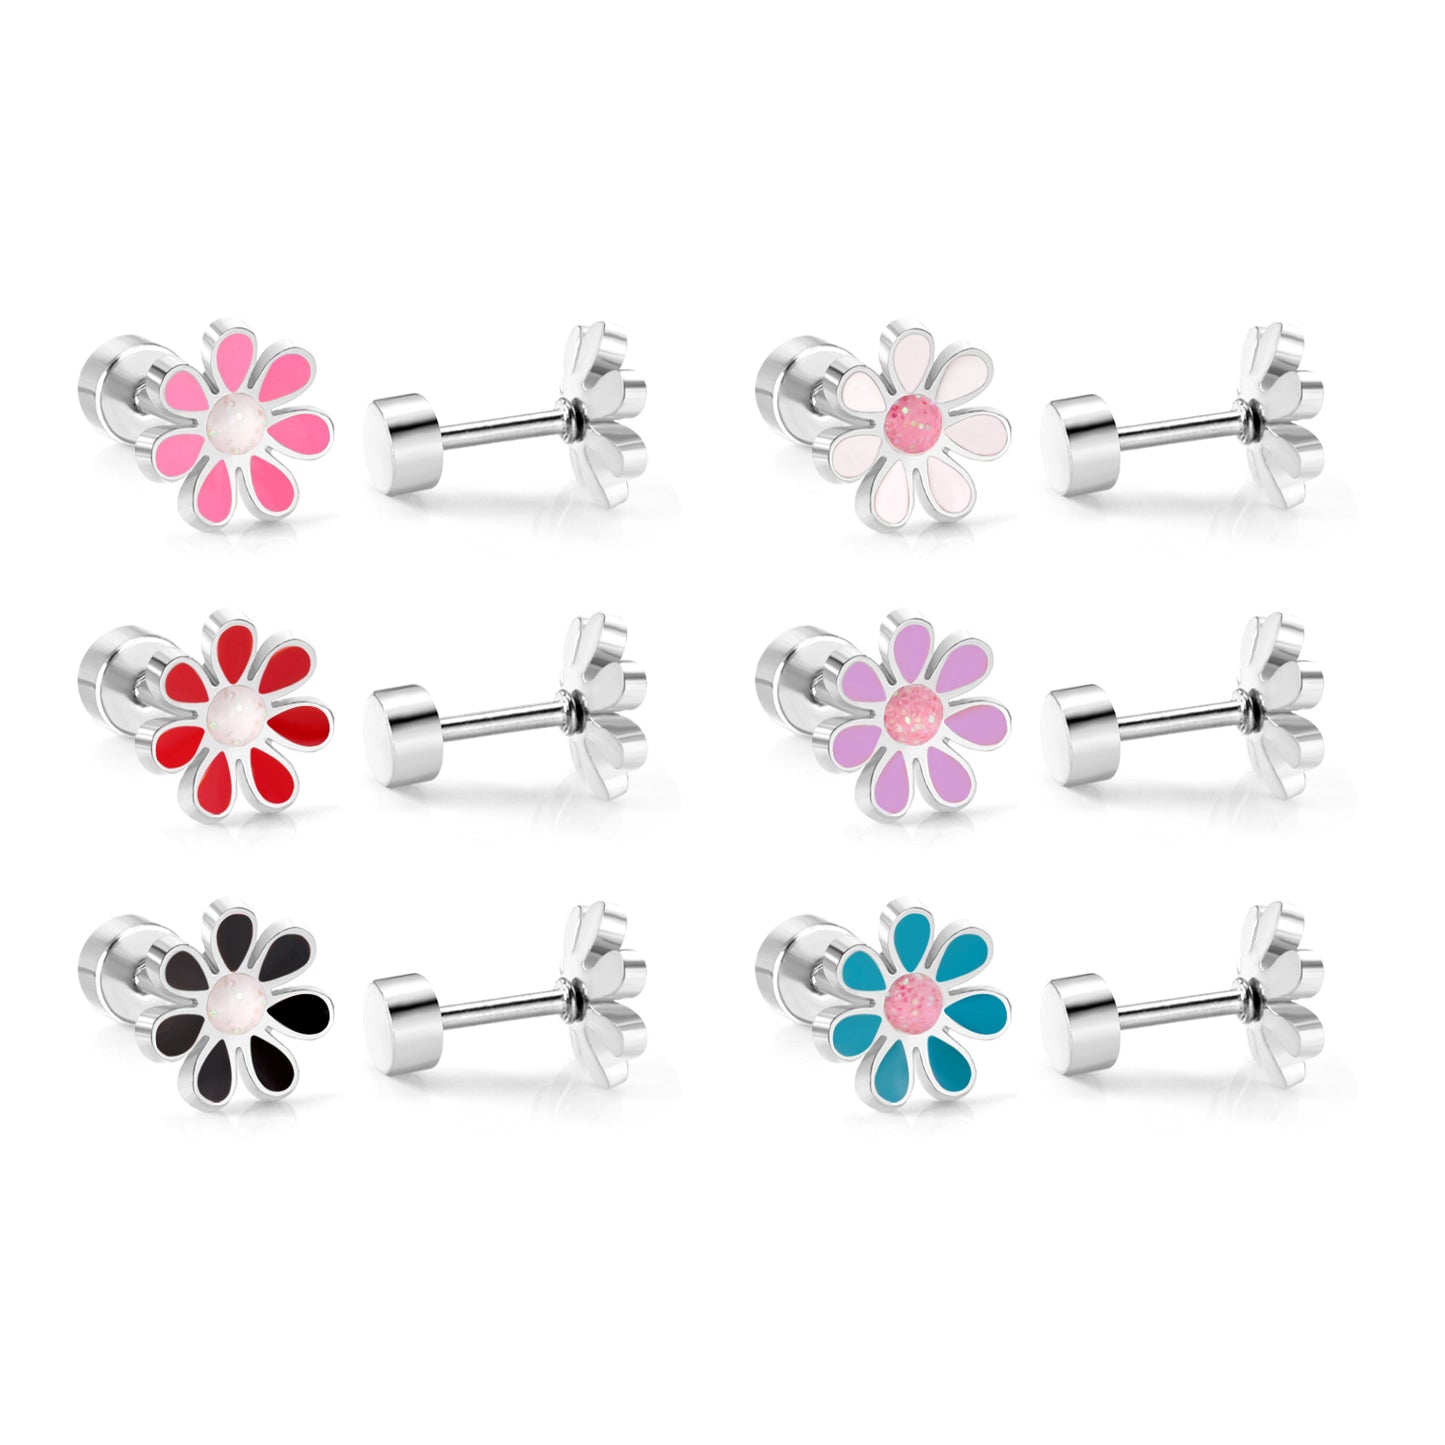 Children's Earrings:  Surgical Steel Lavender/Pink Flowers with Screw Backs with Gift Box